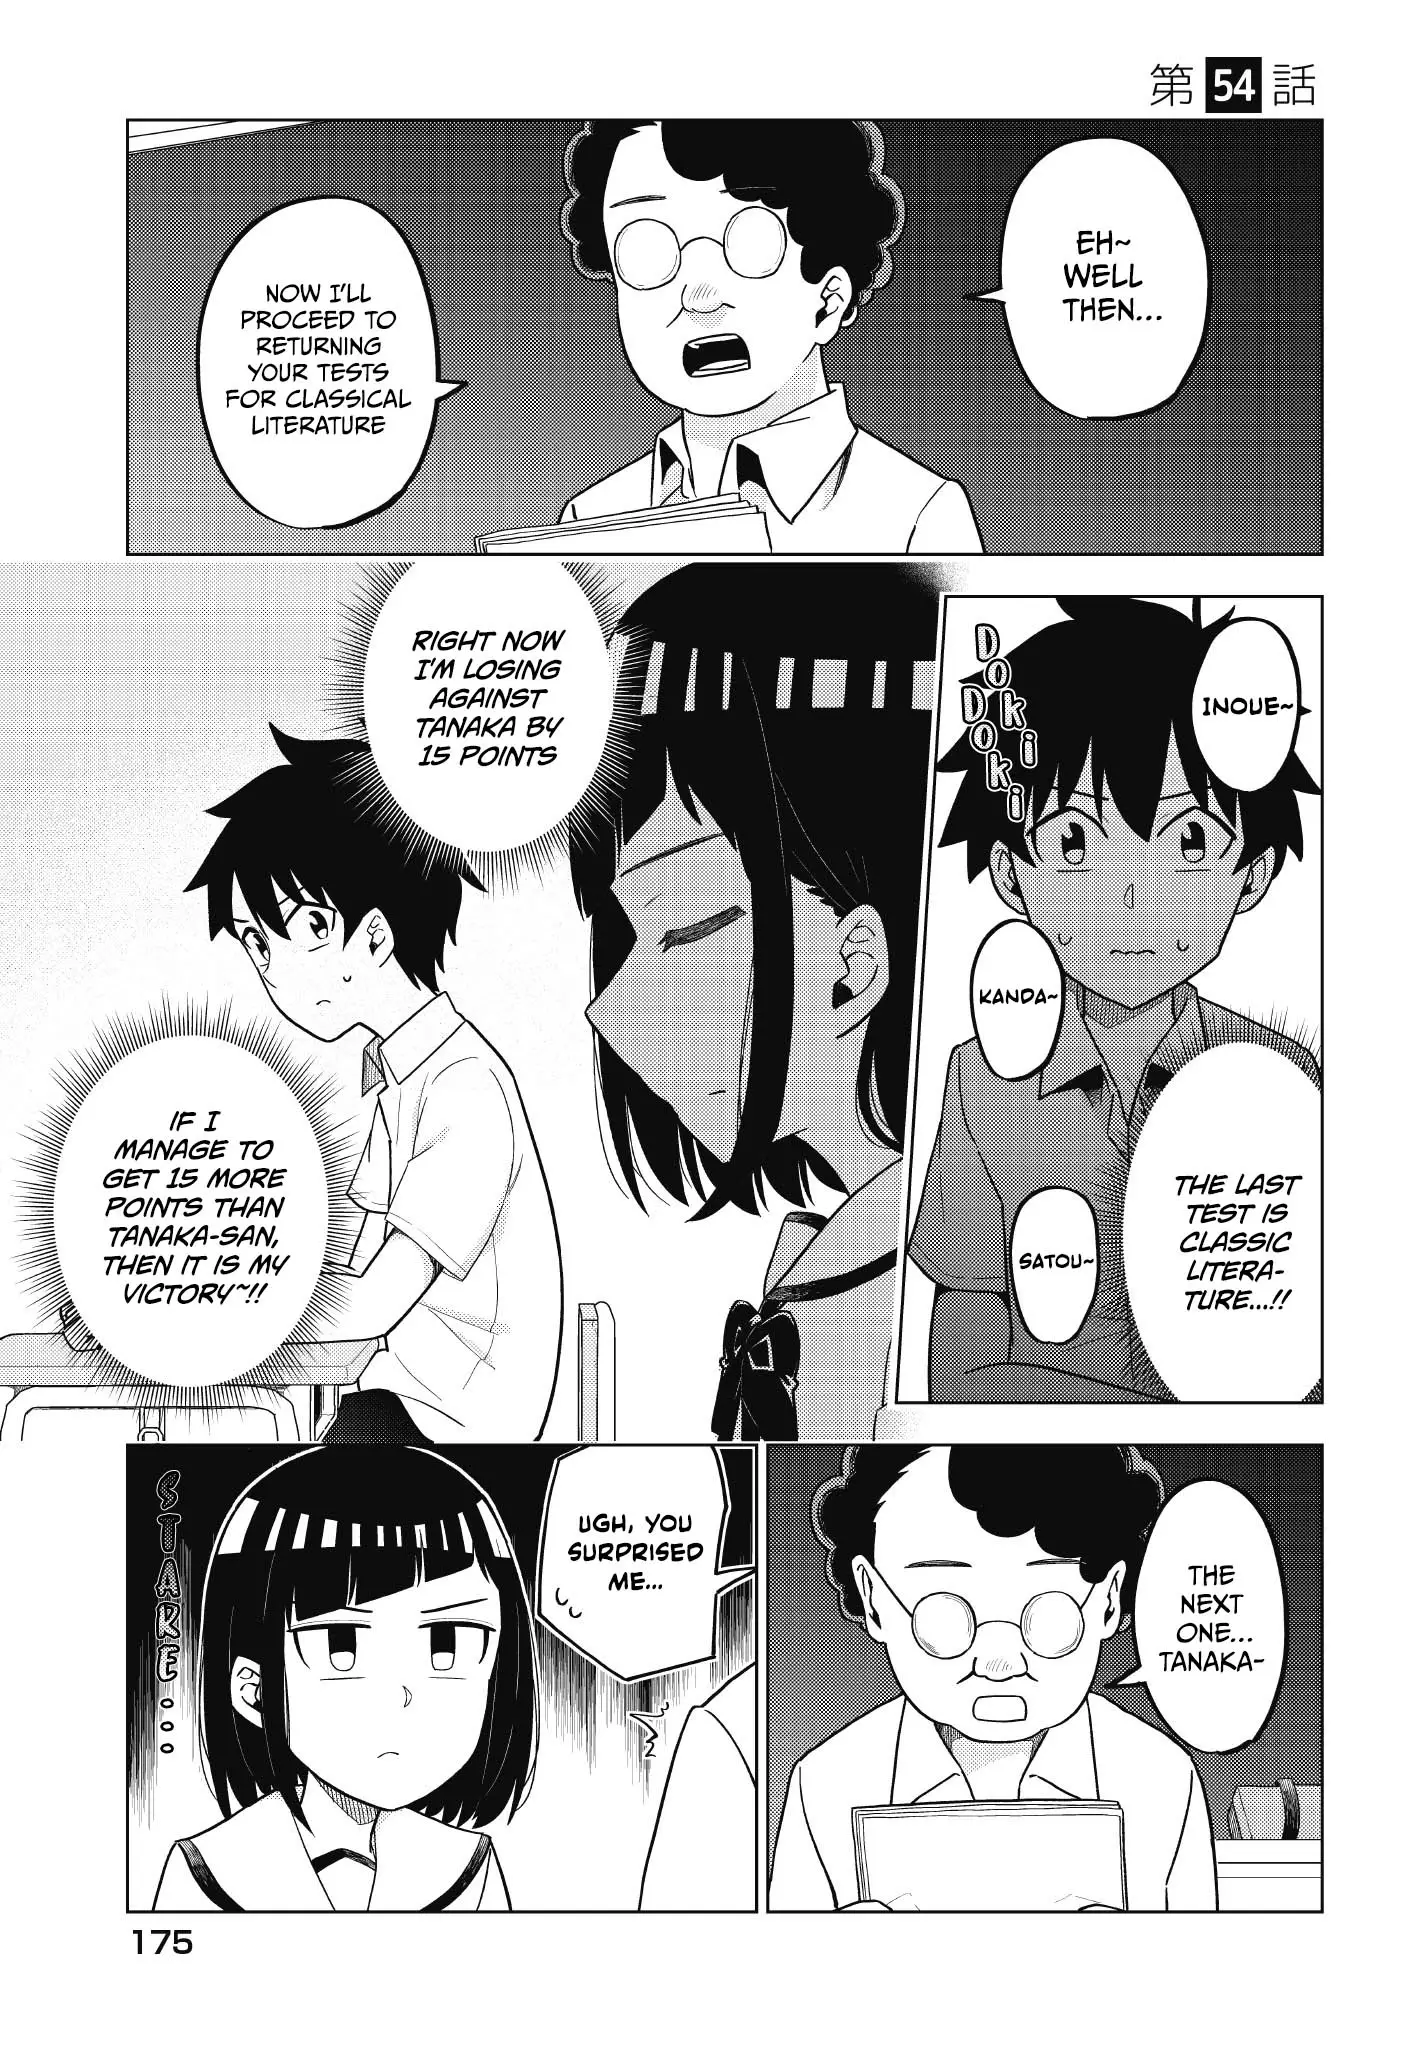 My Classmate Tanaka-San Is Super Scary - 54 page 2